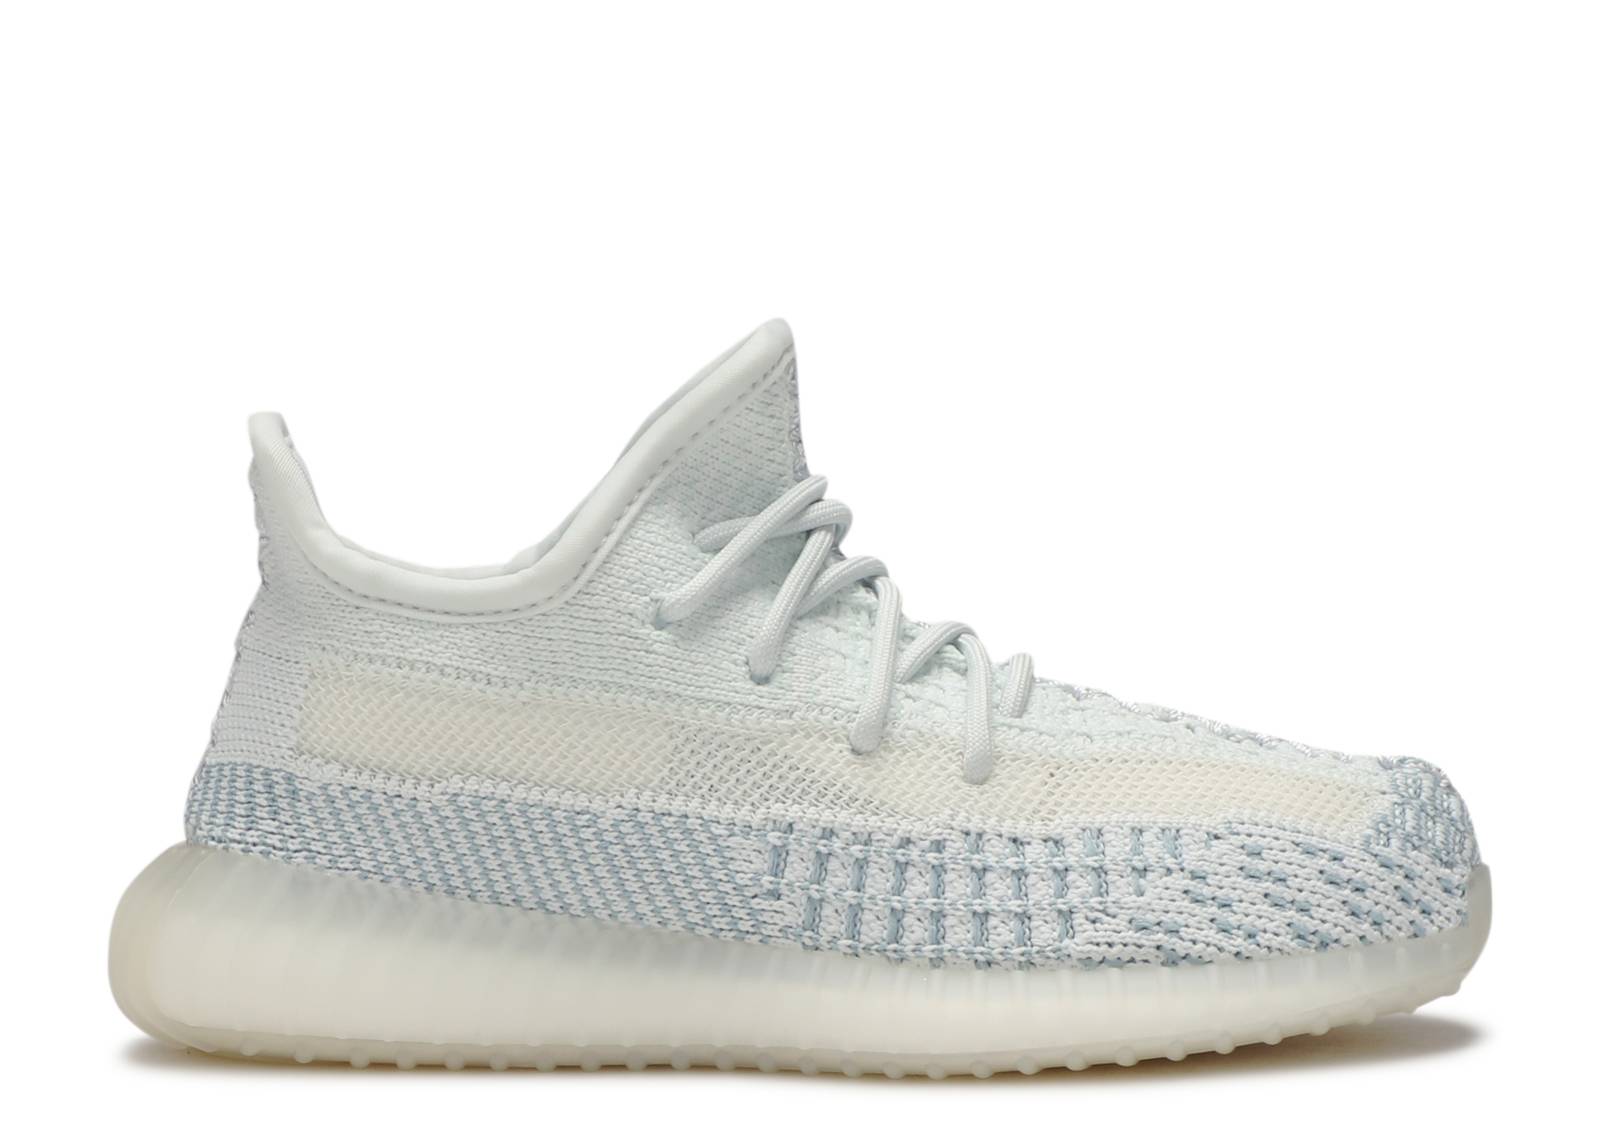 Yeezy Boost 350 V2 Infant 'Cloud White Non-Reflective'